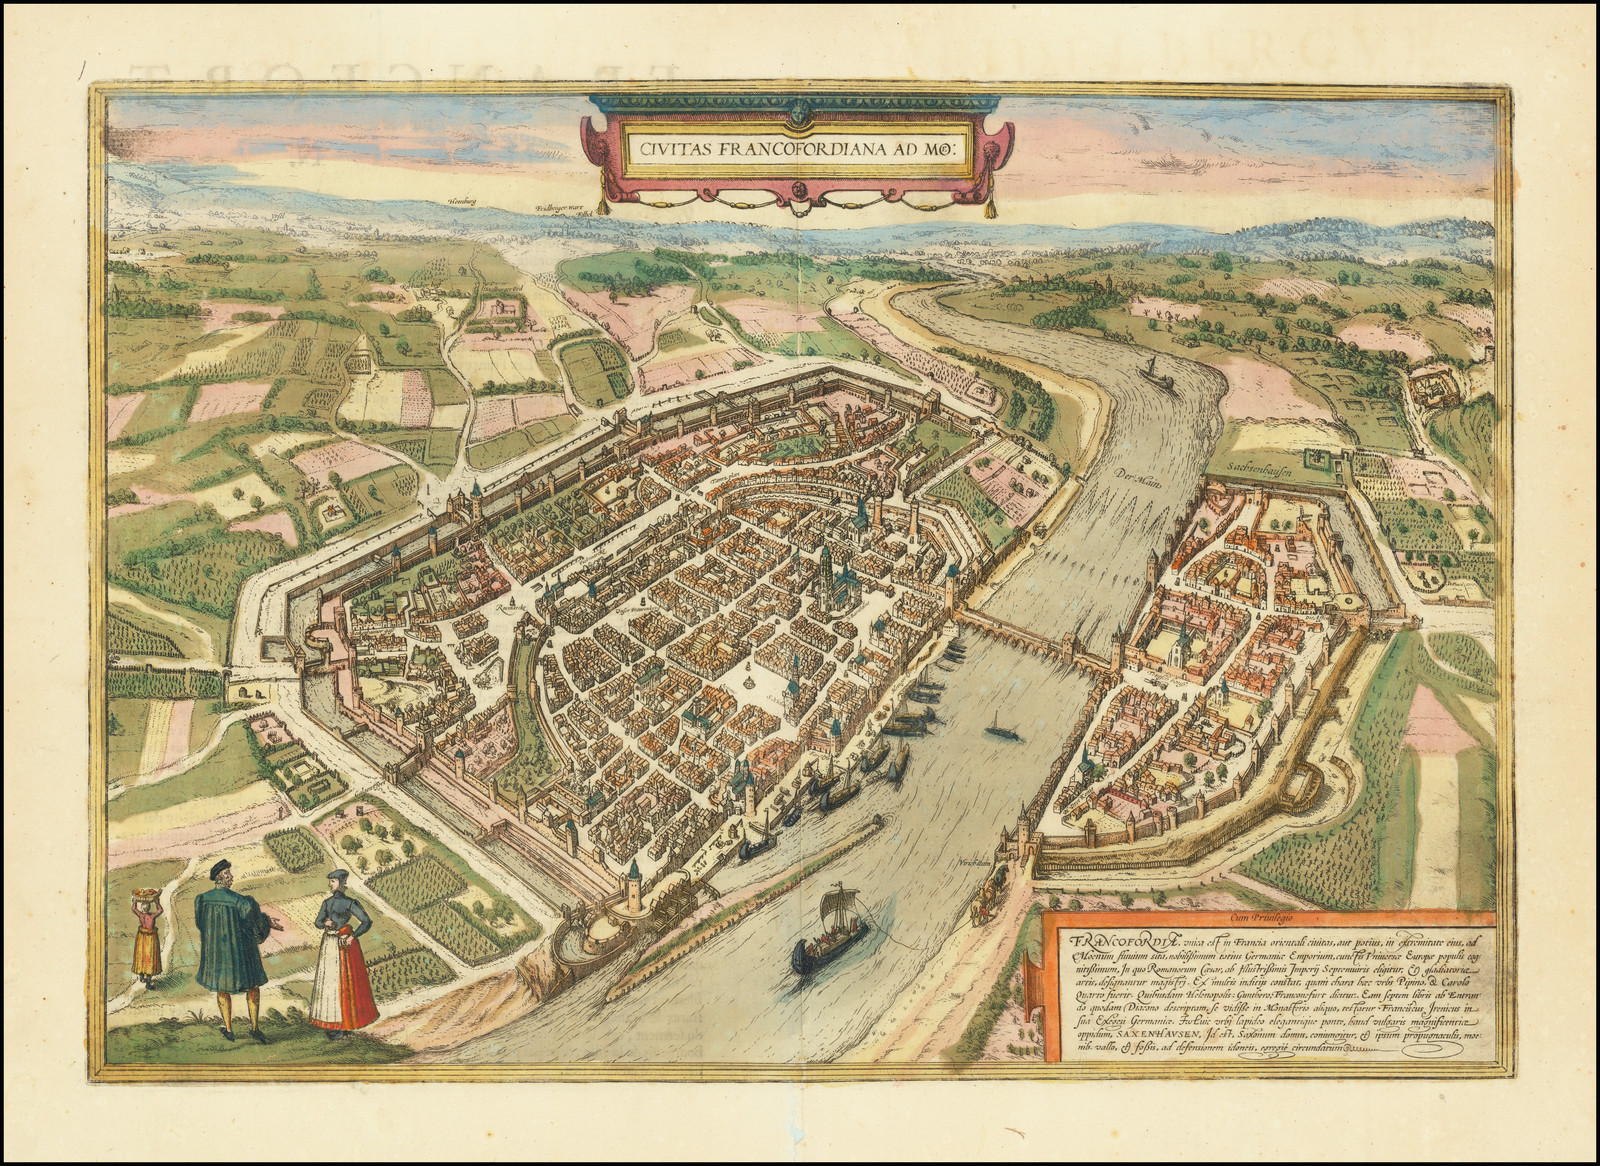 Mapping the towns of Europe: The European towns in Braun & Hogenberg's Town  Atlas, 1572-1617